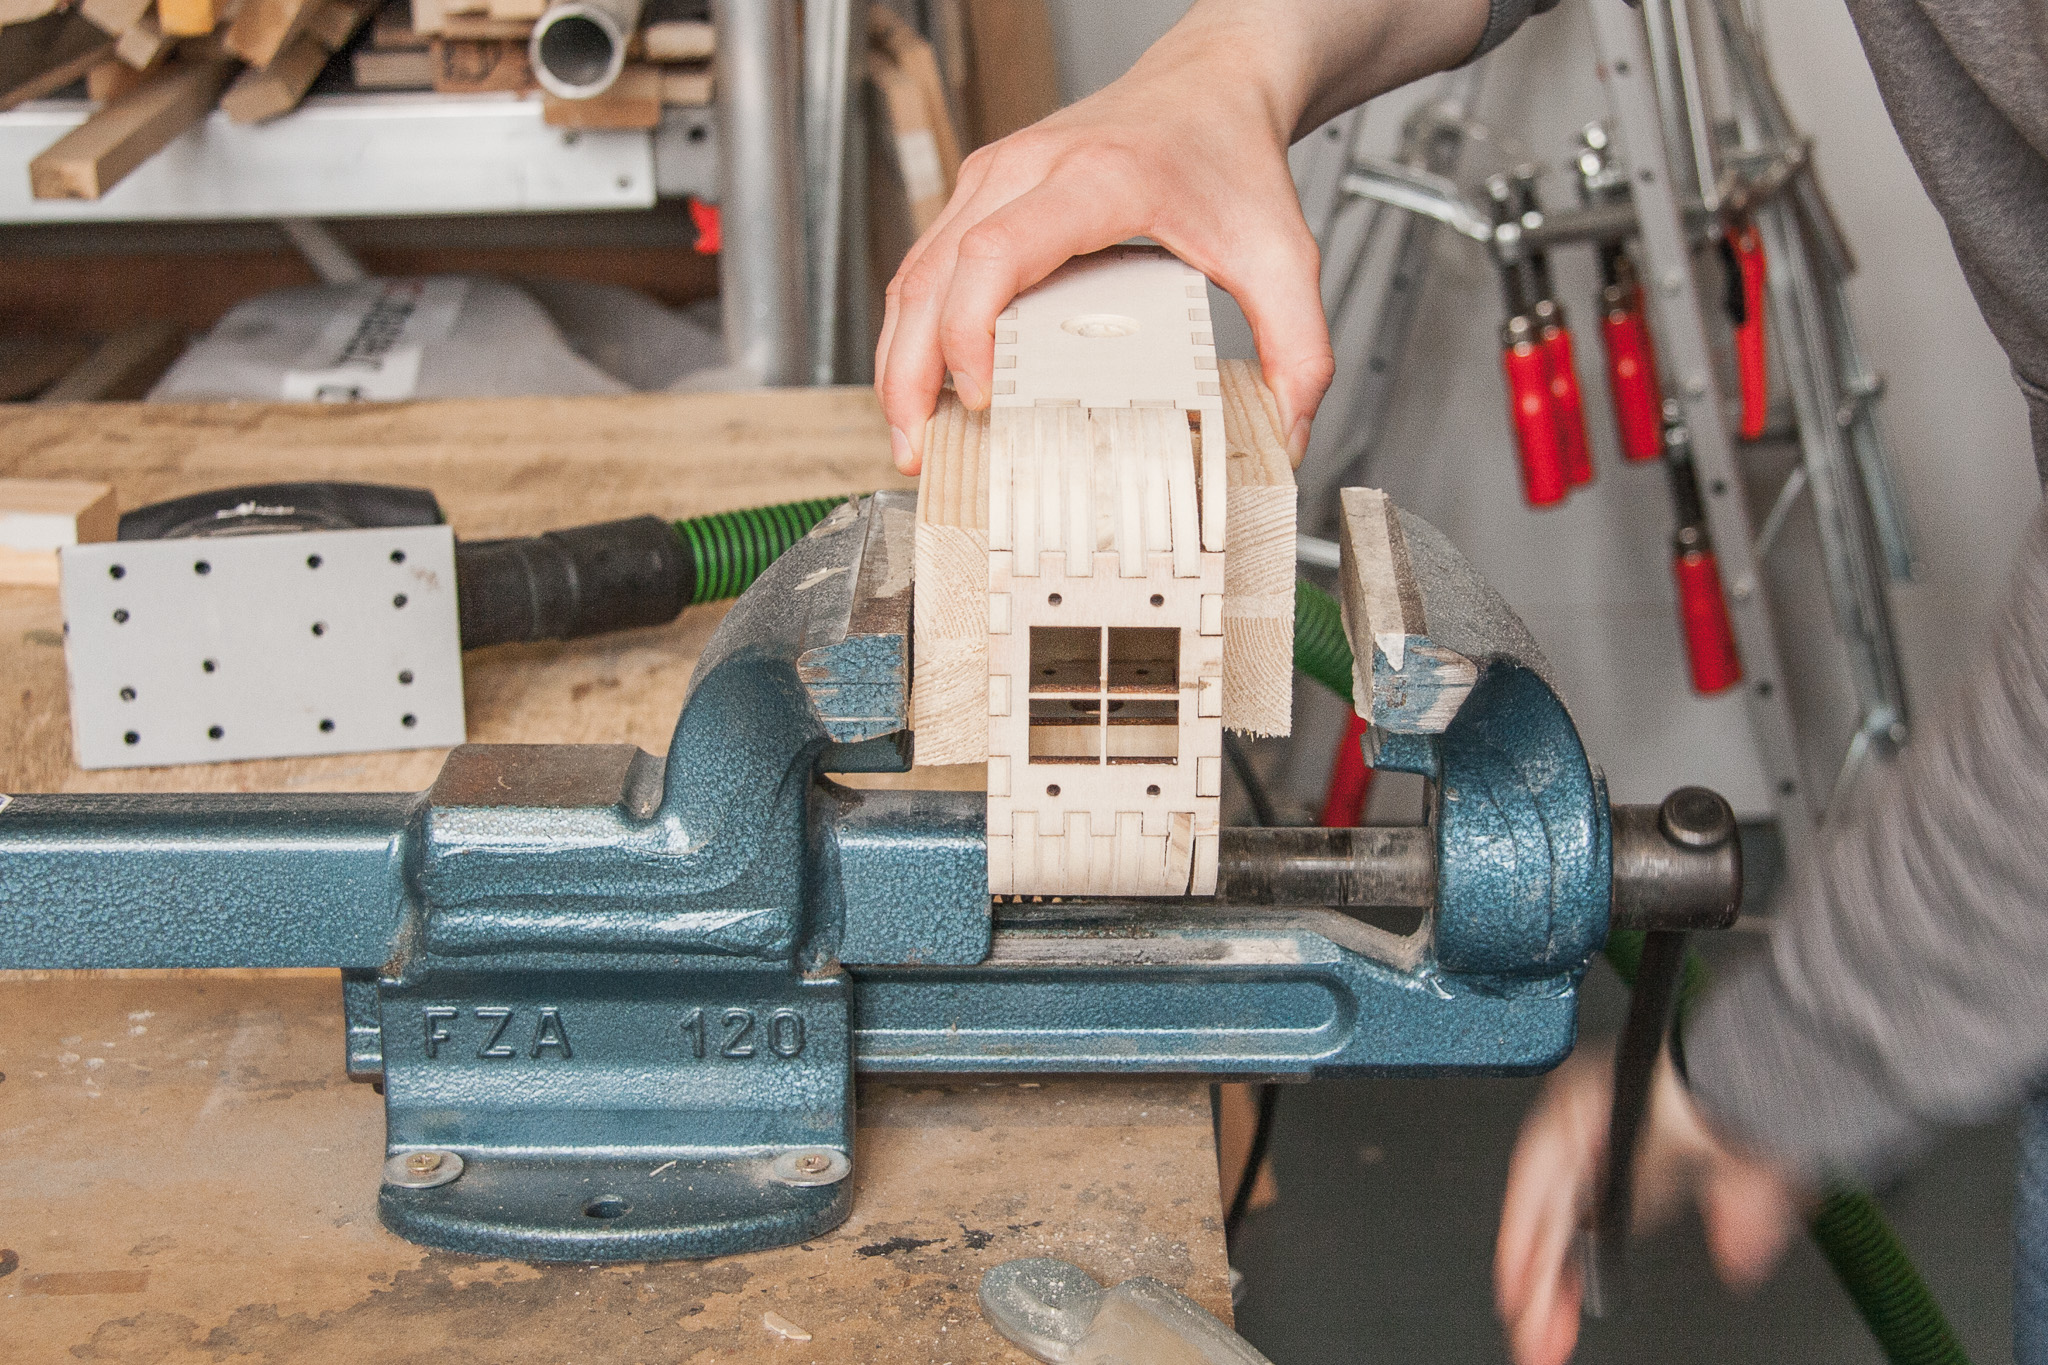 Fix the box in a vise with wooden blocks to protect it from dents.